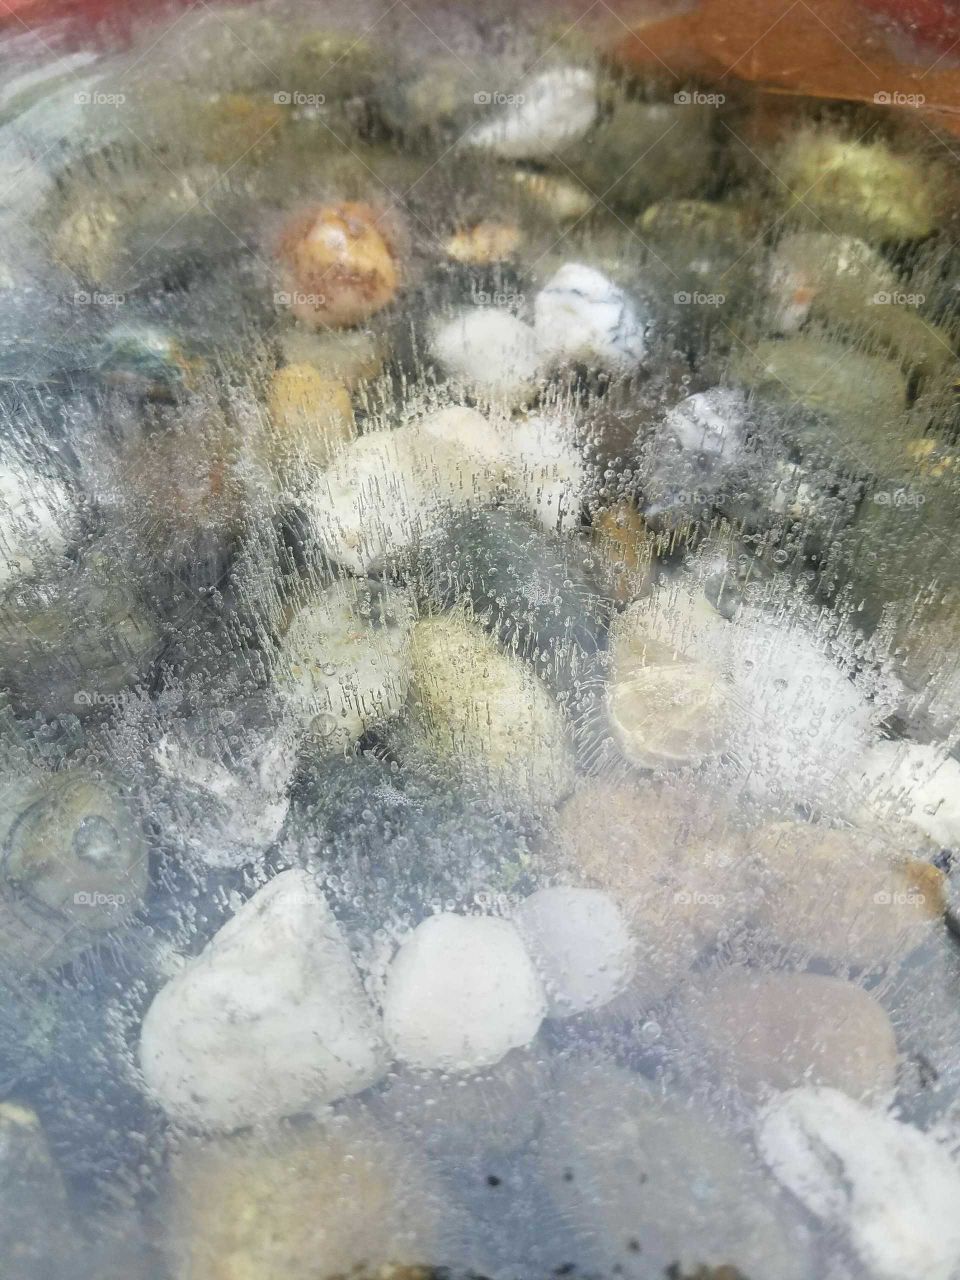 Different rocks and pebbles frozen under water.